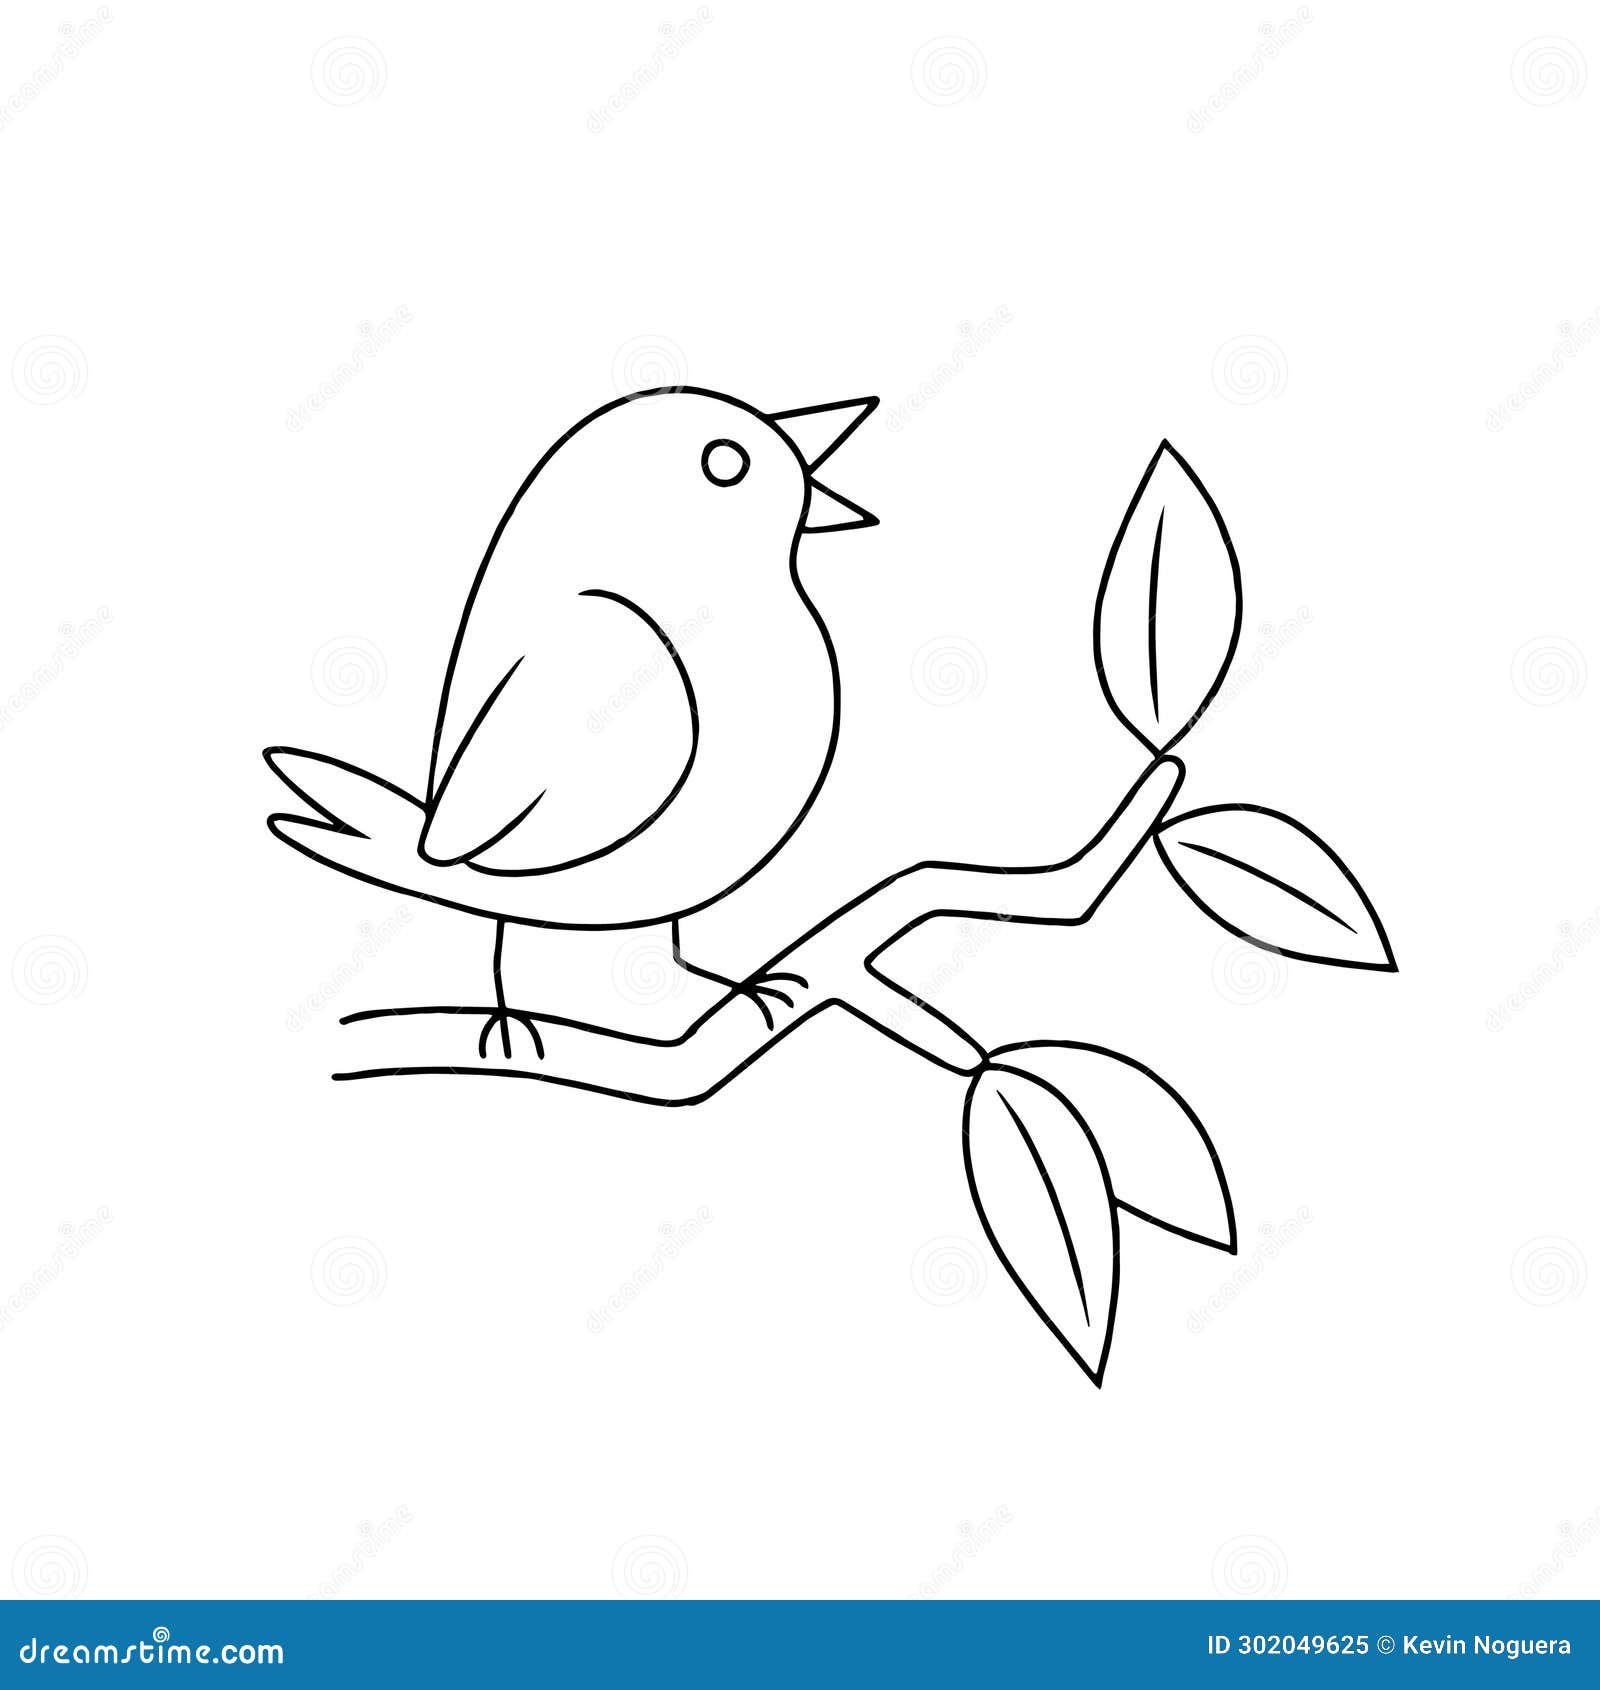 line drawing of a bird in black and white for coloring 